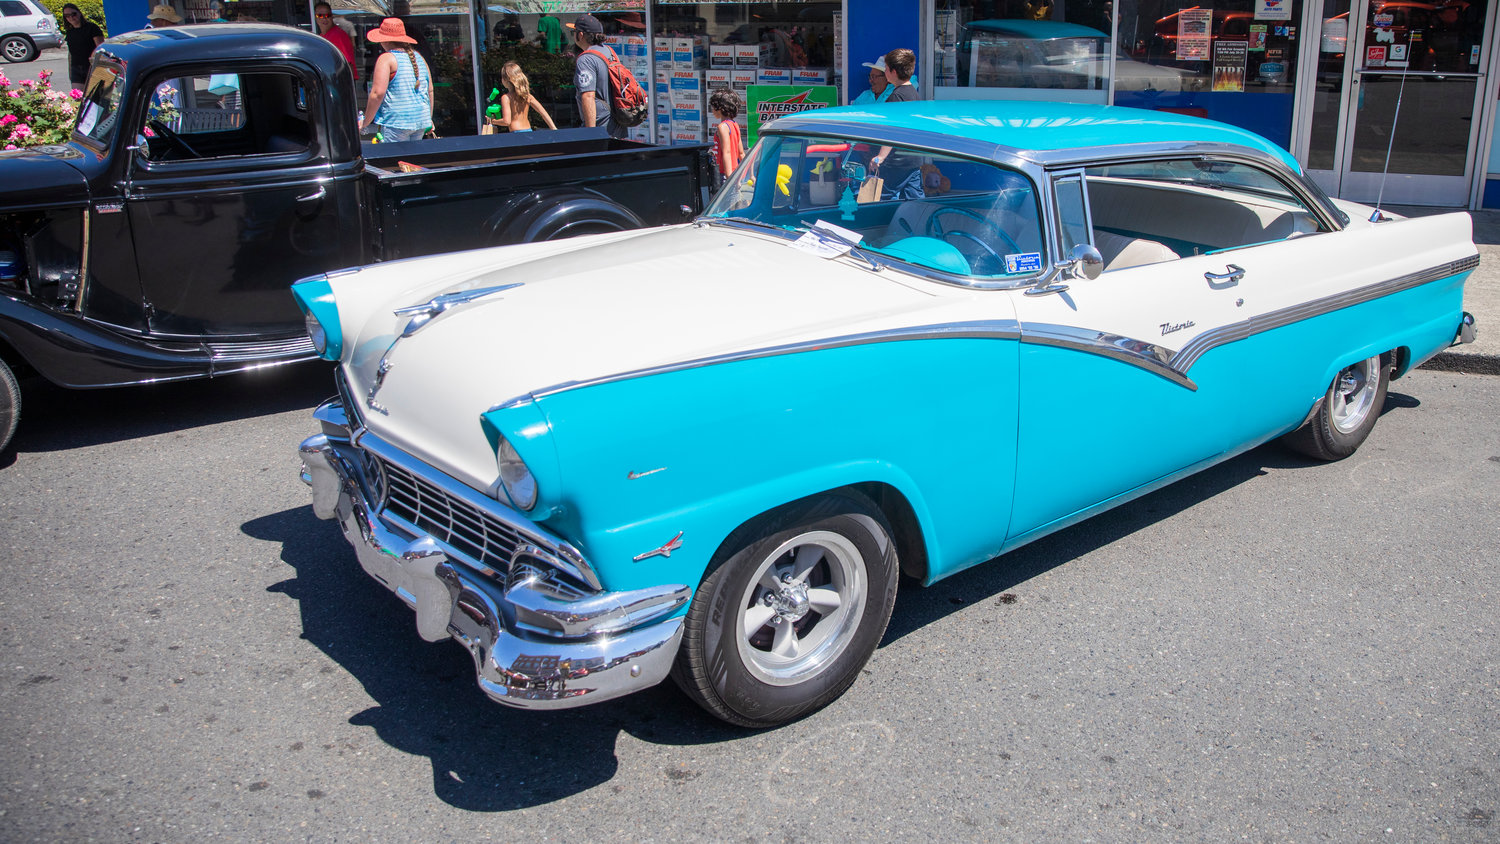 Classic cars sit on display during Chehalis Fest Saturday afternoon.